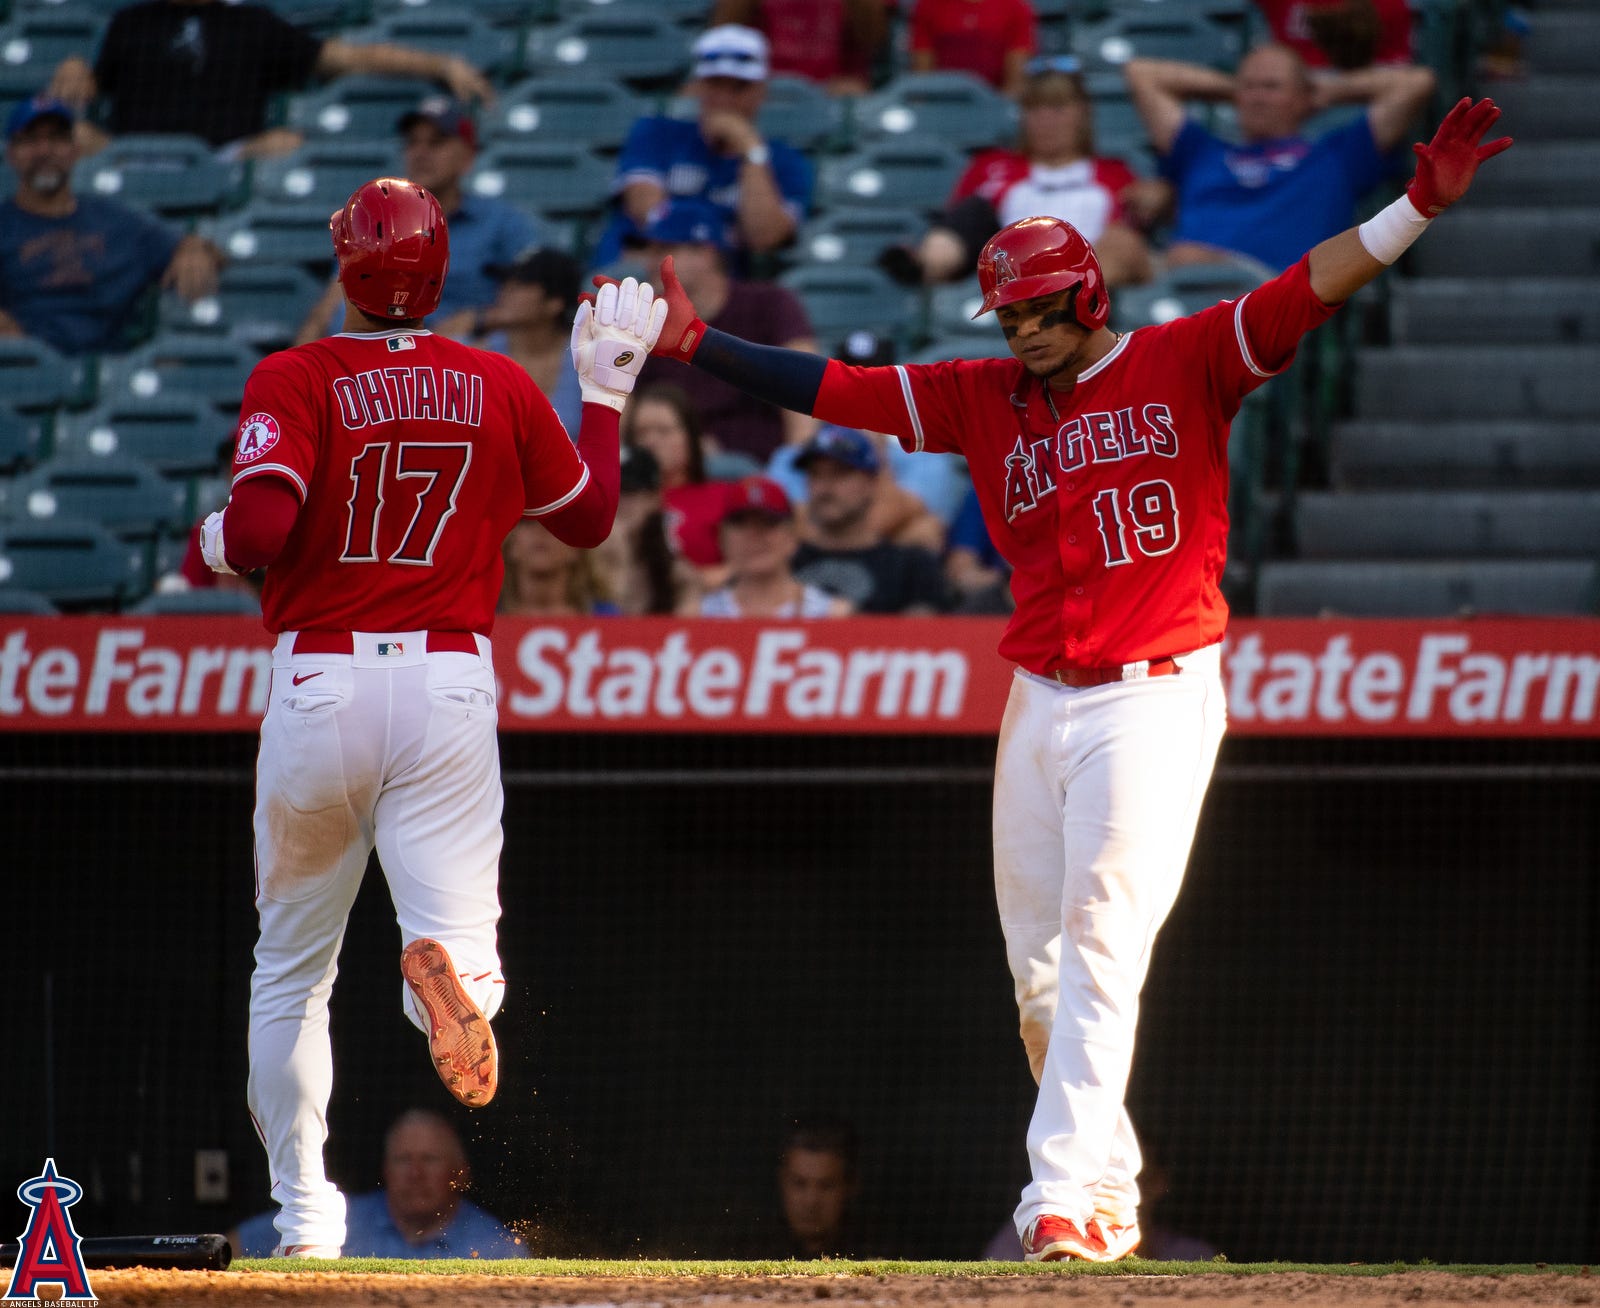 Game Gallery: Blue Jays @ Angels, 8/12/21 - The Halo Way